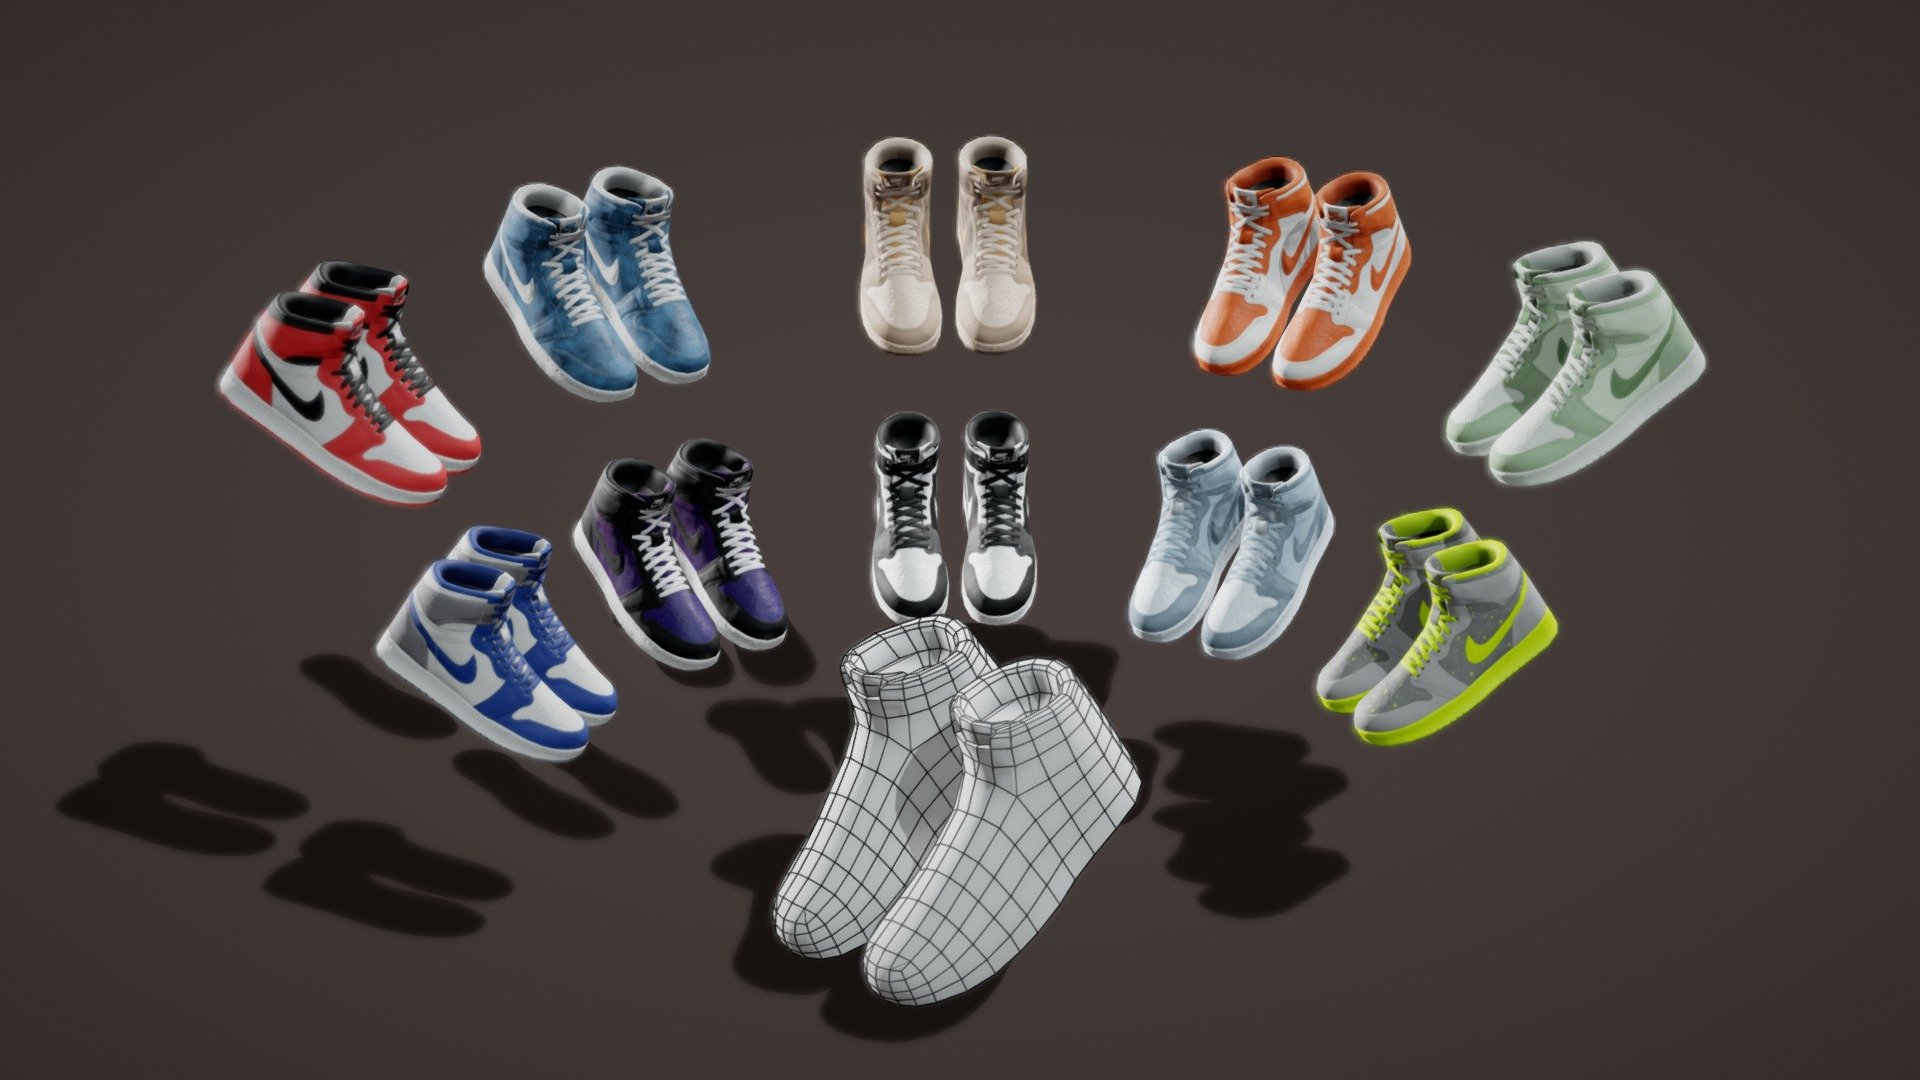 It is a High Quality Very Low poly Air Jordan NIKE Shoes 3d model

Will be perfect for any Cool 3d metaverse Project, as it is verly low poly and low date file

Model : 822 Face and 796 Verts. (per Pair)
Model in the Center is to show low poly Wireframe.

Texture :
3 Baked Texture in High quality 2k texture

Texture are baked from highpoly model to lowpoly

GLB file : Size of each pair is below 1mb including all the textures
GLB File Size of all the Shoes is 3.6 mb as it make use of same Metallic, Roughness &amp; Normal map.
Diffuse map is Defferent in all Shoes,

Individual Shoes :

Shoes 01

Shoes 02

Shoes 03

Shoes 04

Shoes 05

Shoes 06

Shoes 07

Shoes 08

Shoes 09

Shoes 10

Highpoly :
Air Jordan - Pack of 10 - Air Jordan Nike shoes - Pack of 10 - Buy Royalty Free 3D model by 5th Dimension (@5th-Dimension) 3d model